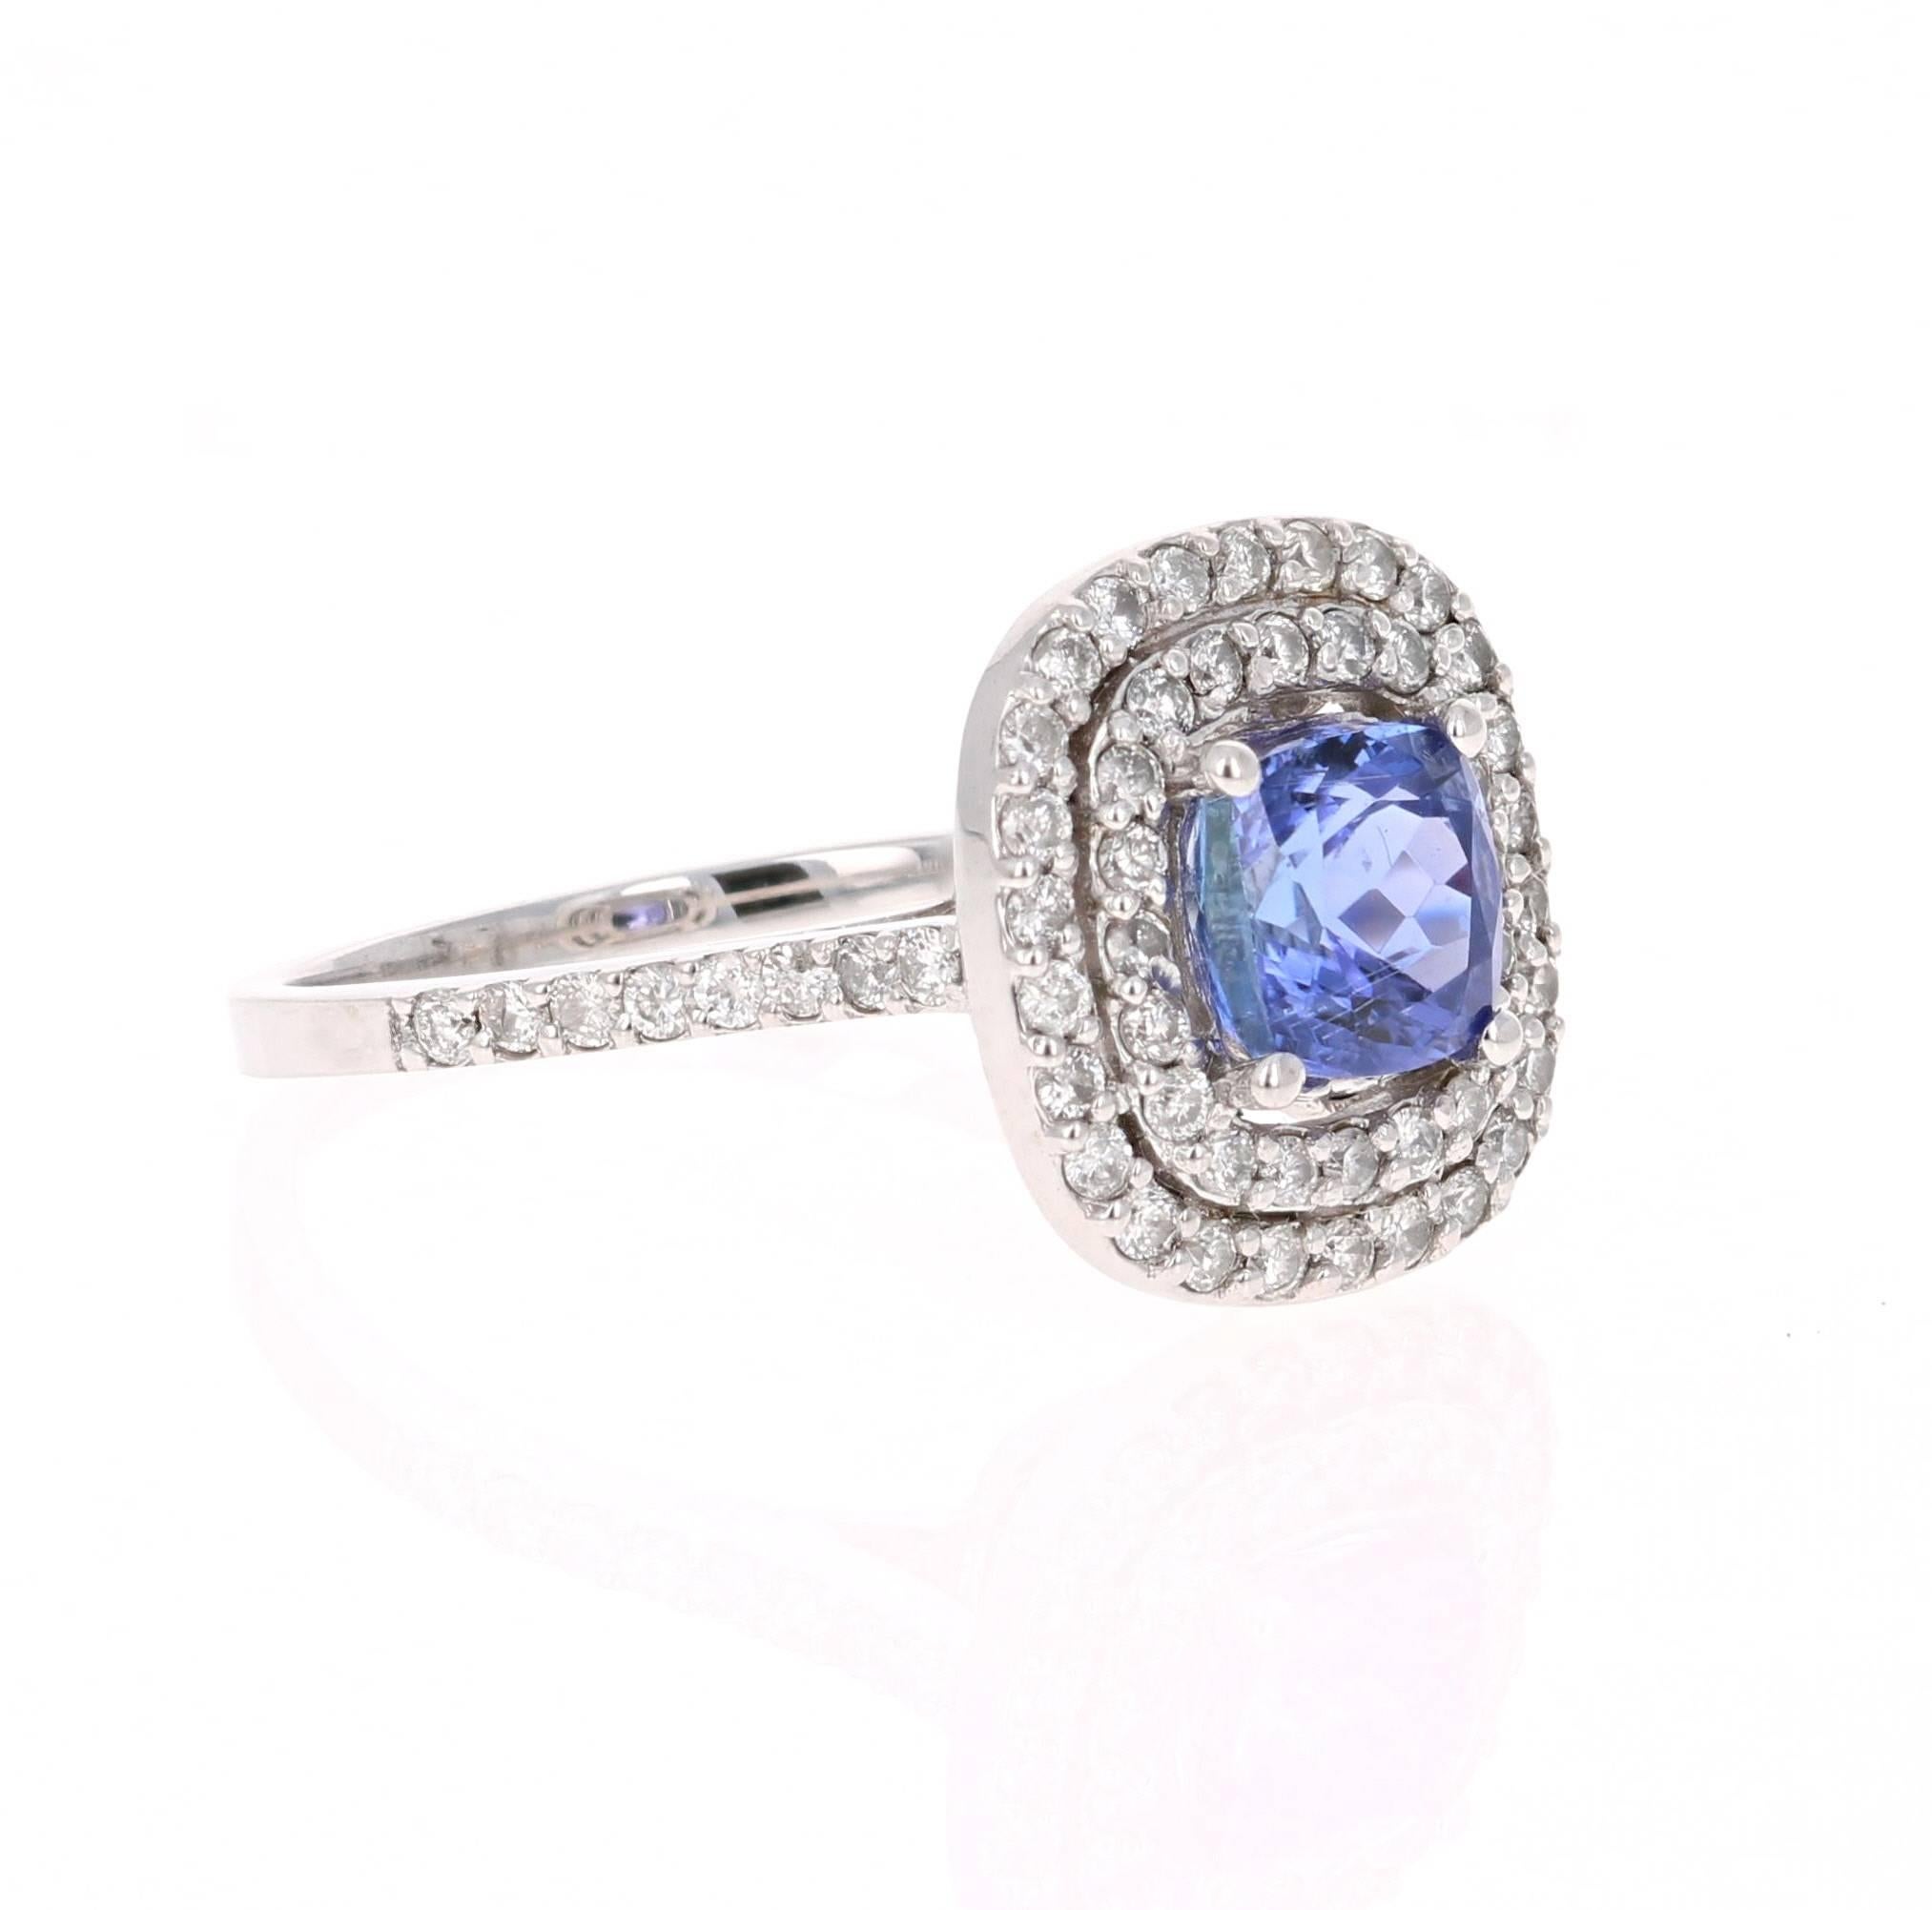 This gorgeous ring has a 1.58 Carat Tanzanite that is set in the center of the ring.  The Tanzanite is surrounded by a double Halo of 68 Round Cut Diamonds that weigh 0.66 carats. The total carat weight of the ring is 2.24 carats.   

The ring is